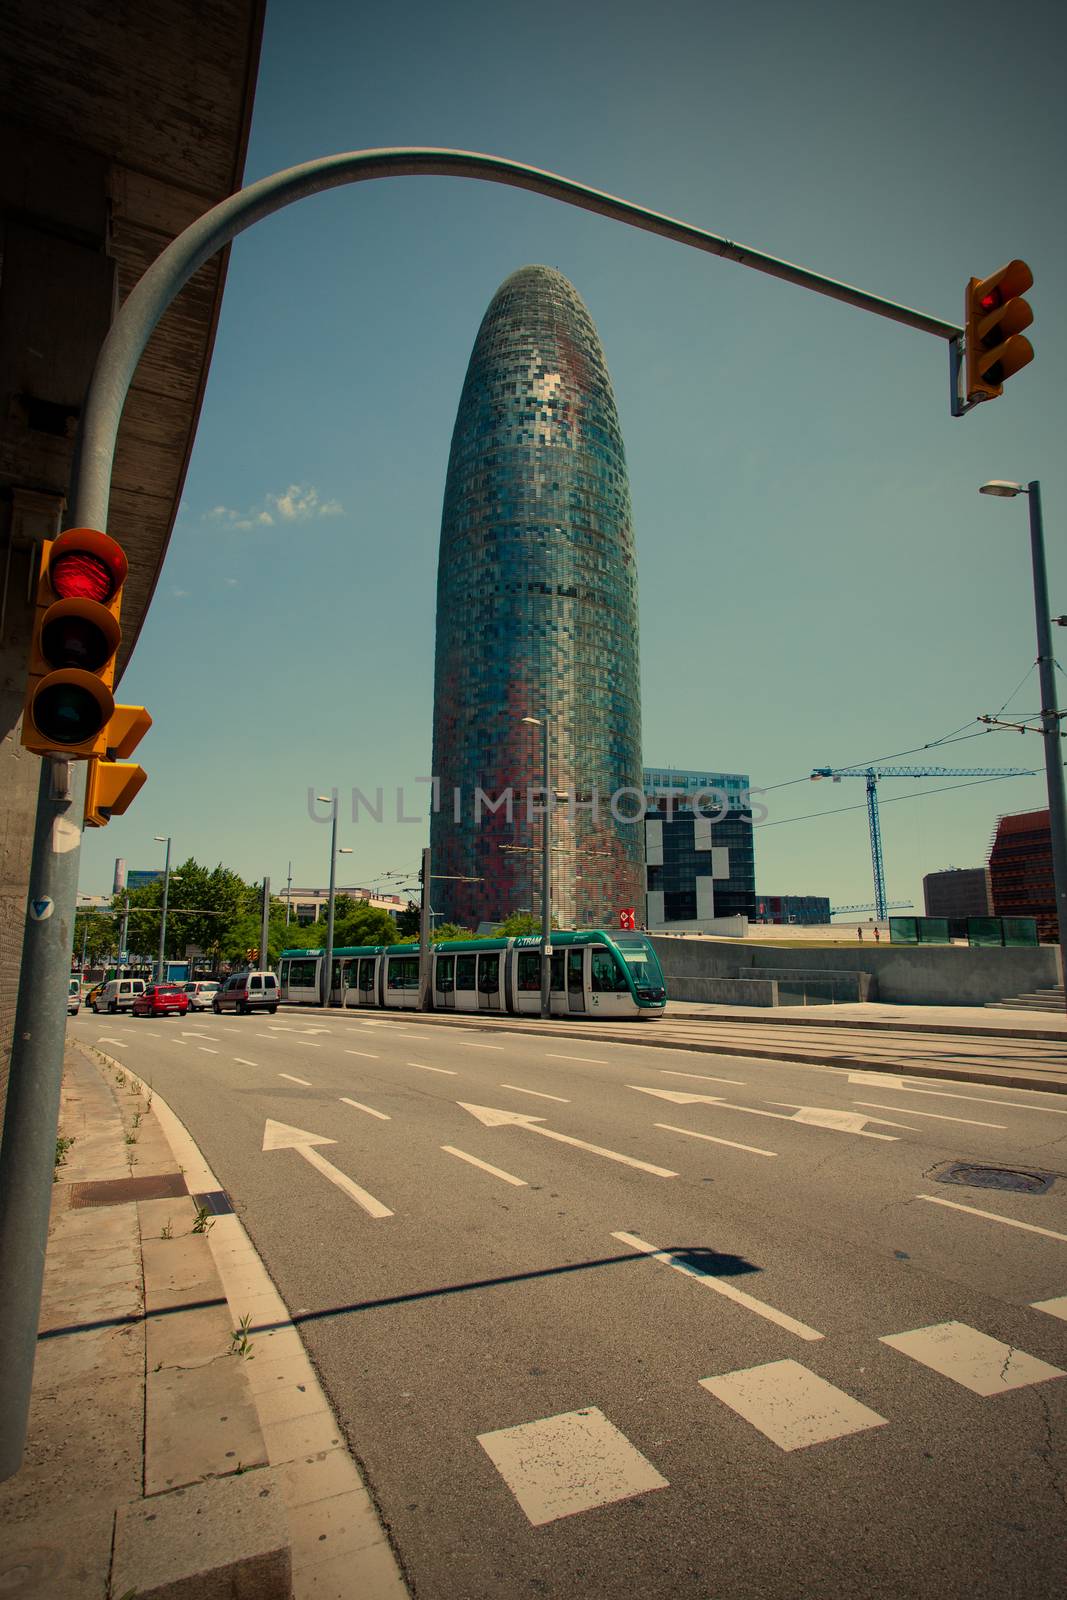 Spain, Catalunya, Barcelona 14.06.2013, the city's landscape with the building Torre Agbar, traffic lights and speed tram, instagram filter style, editorial use only